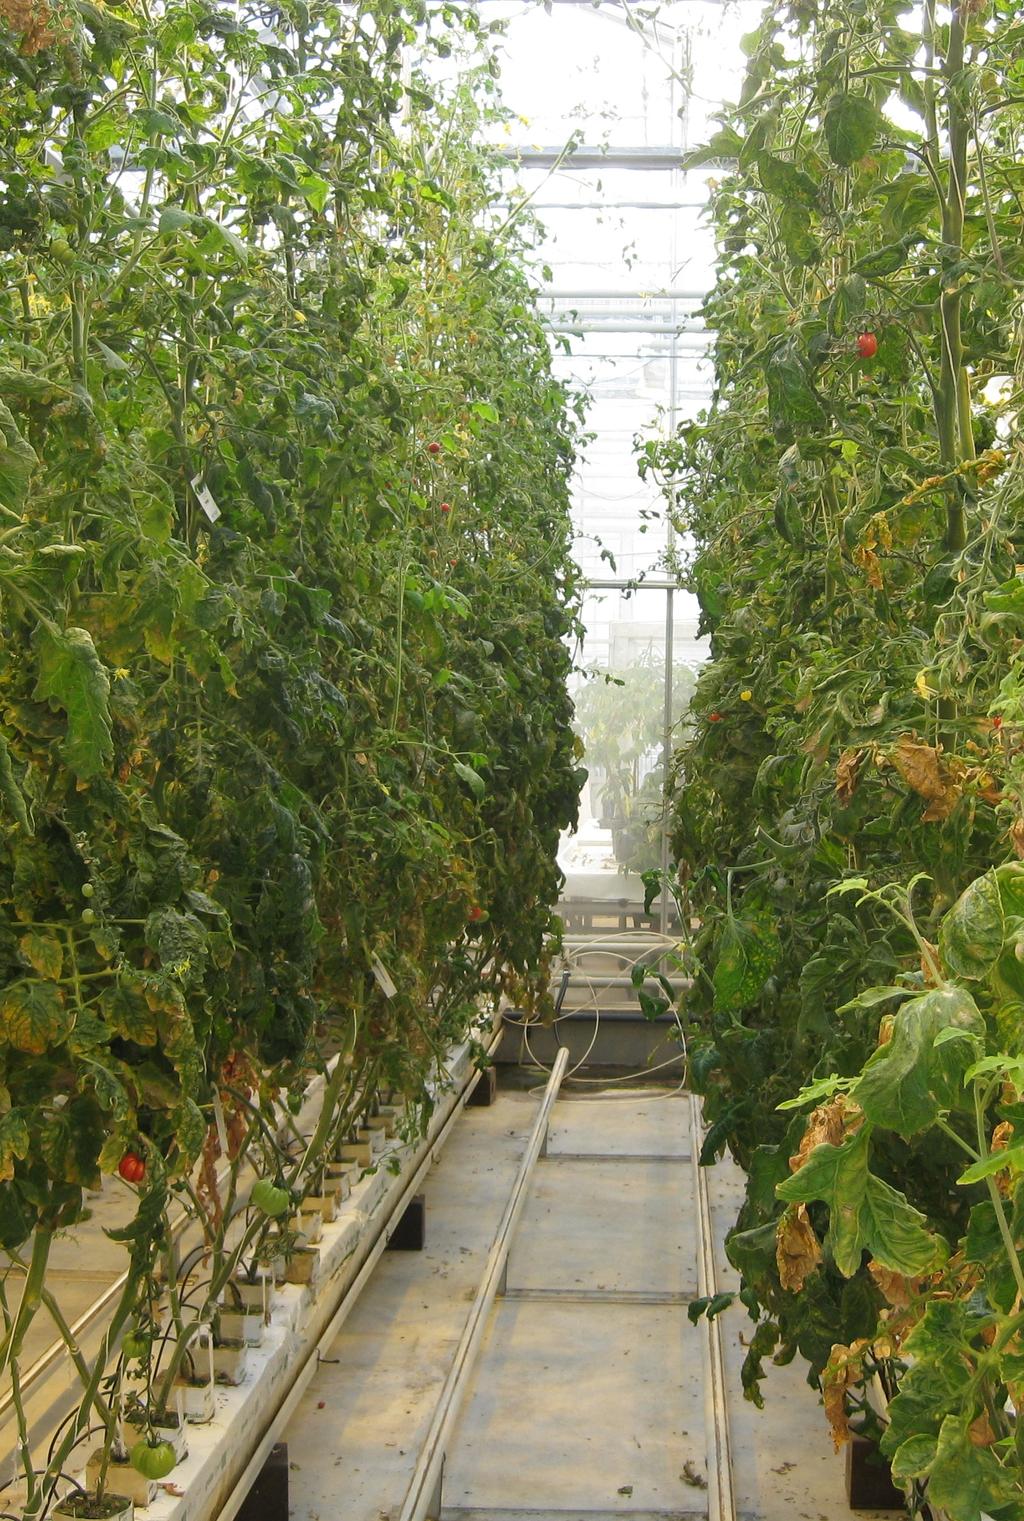 150 tomato genome project Public-private partnership initiated by TTI green genetics and BGI China (Re)sequencing 150